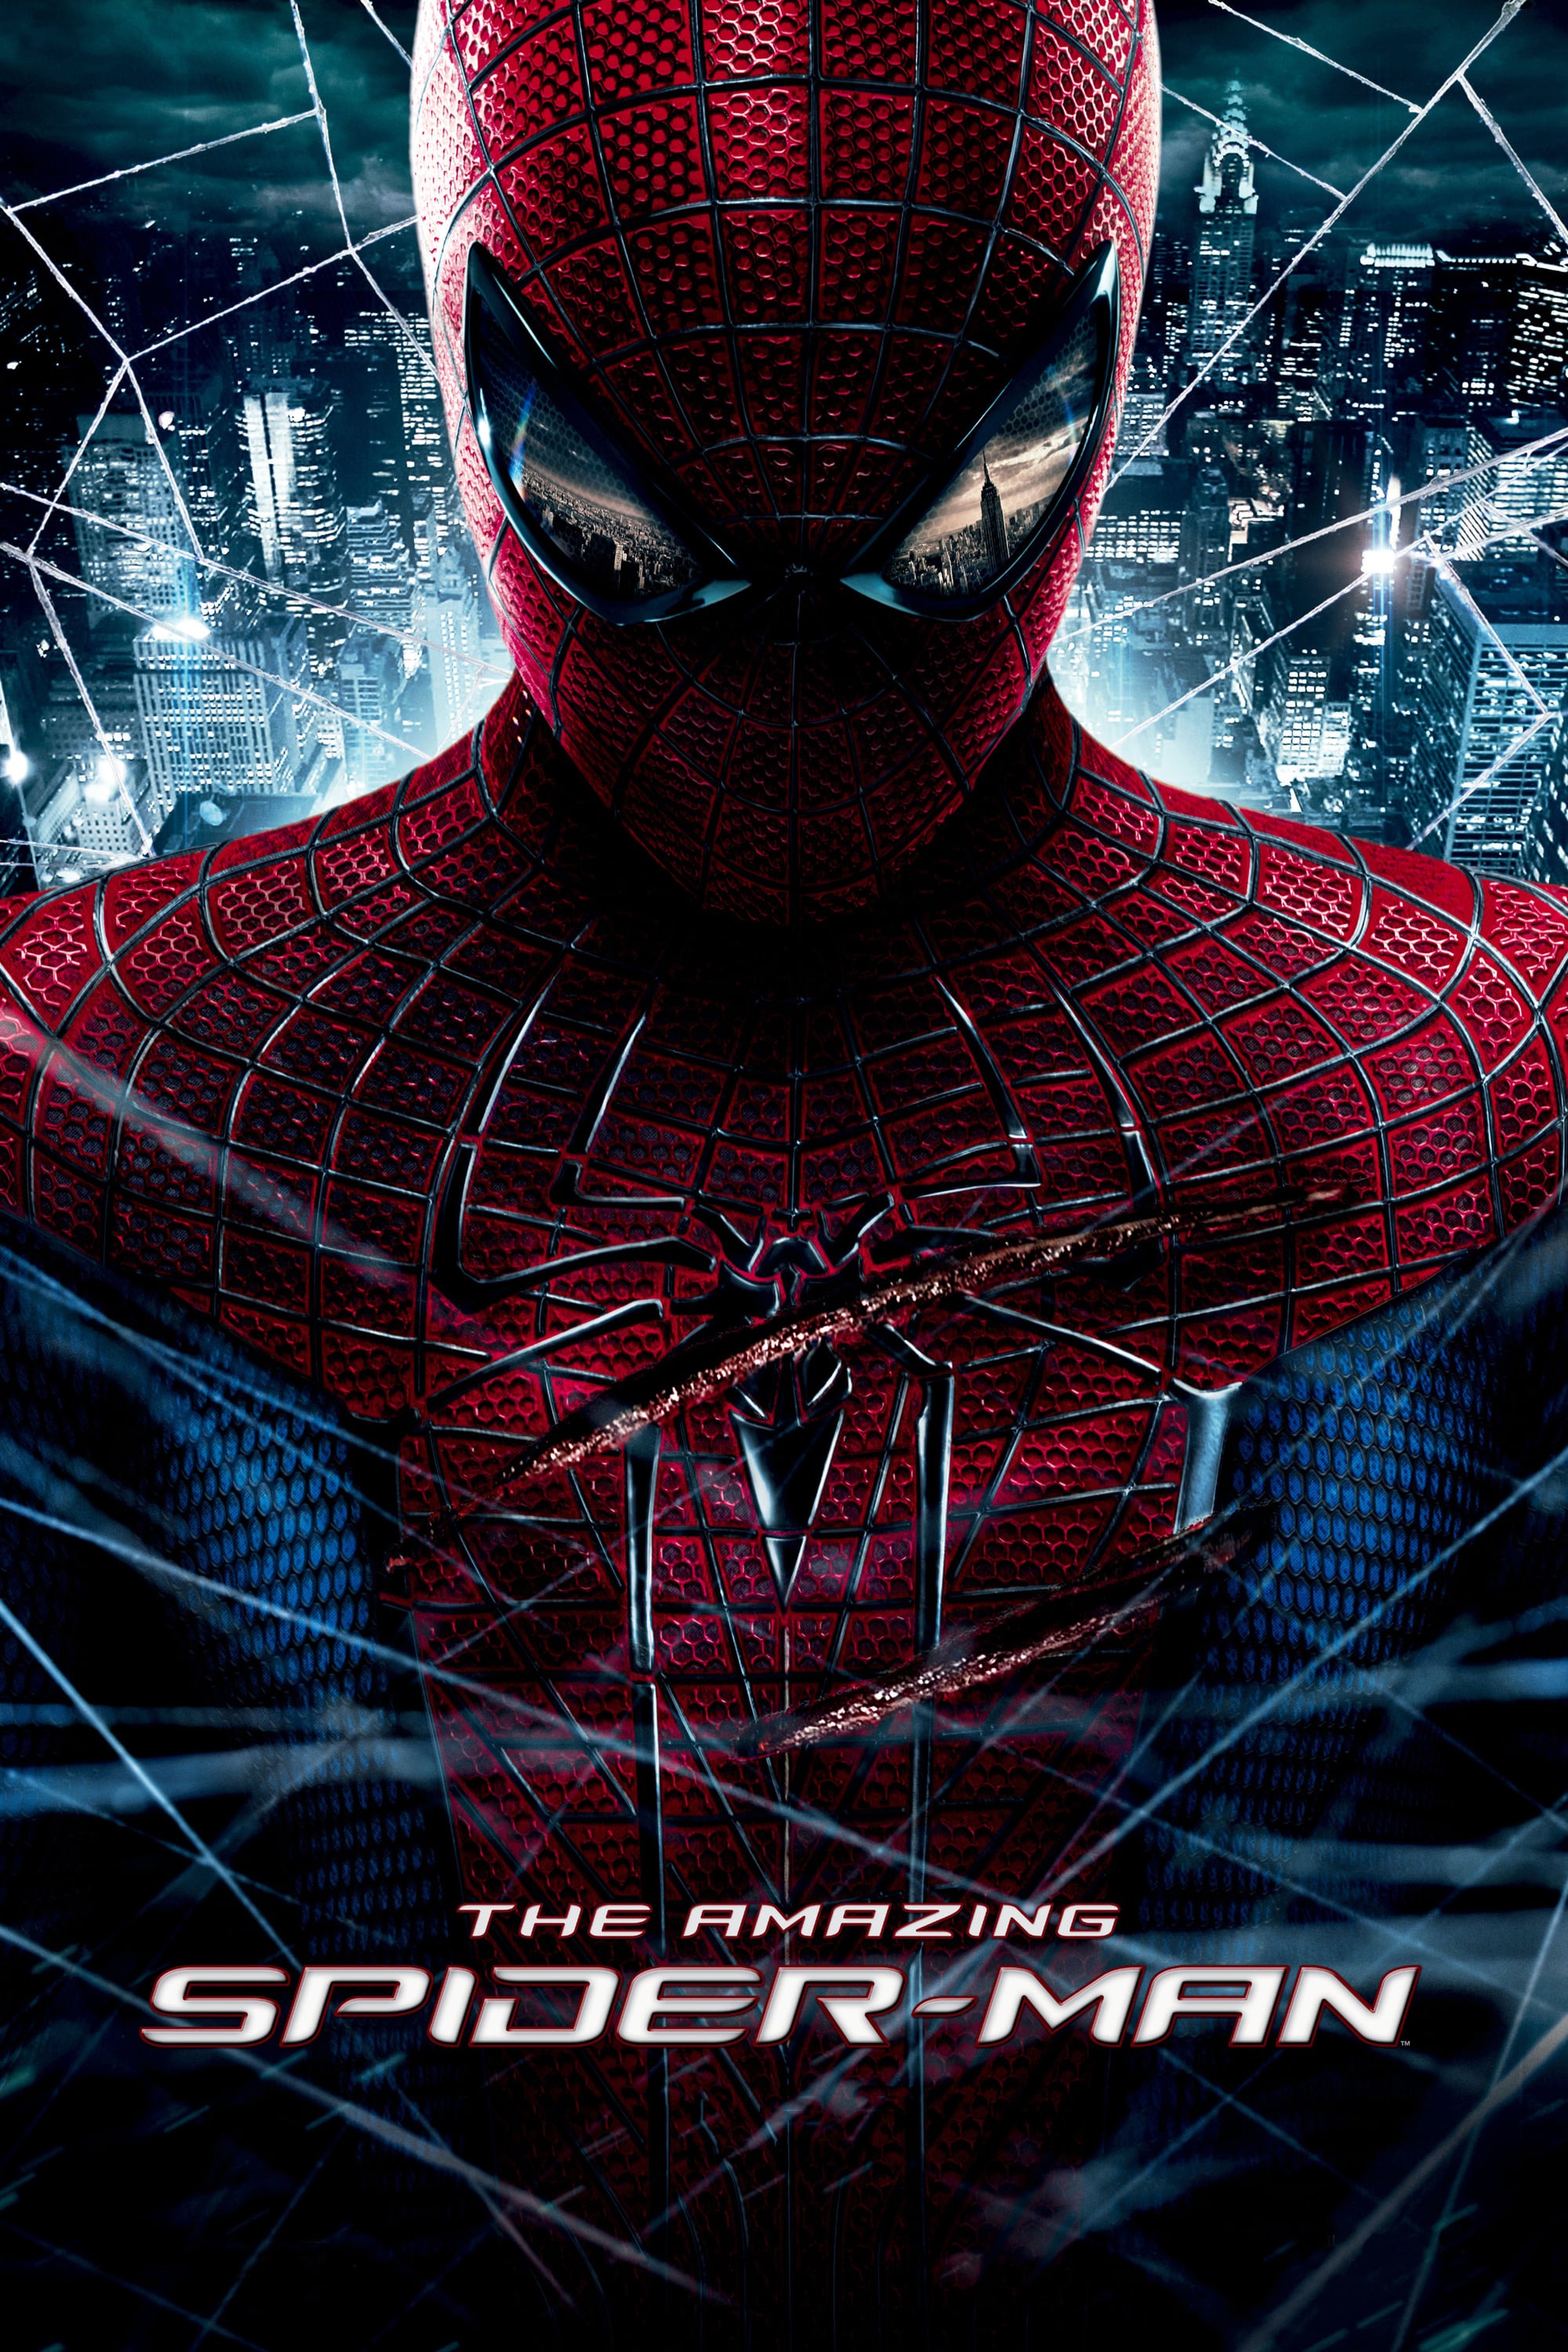 The Amazing Spider-Man 3 Poster I made. Who else wants to see this